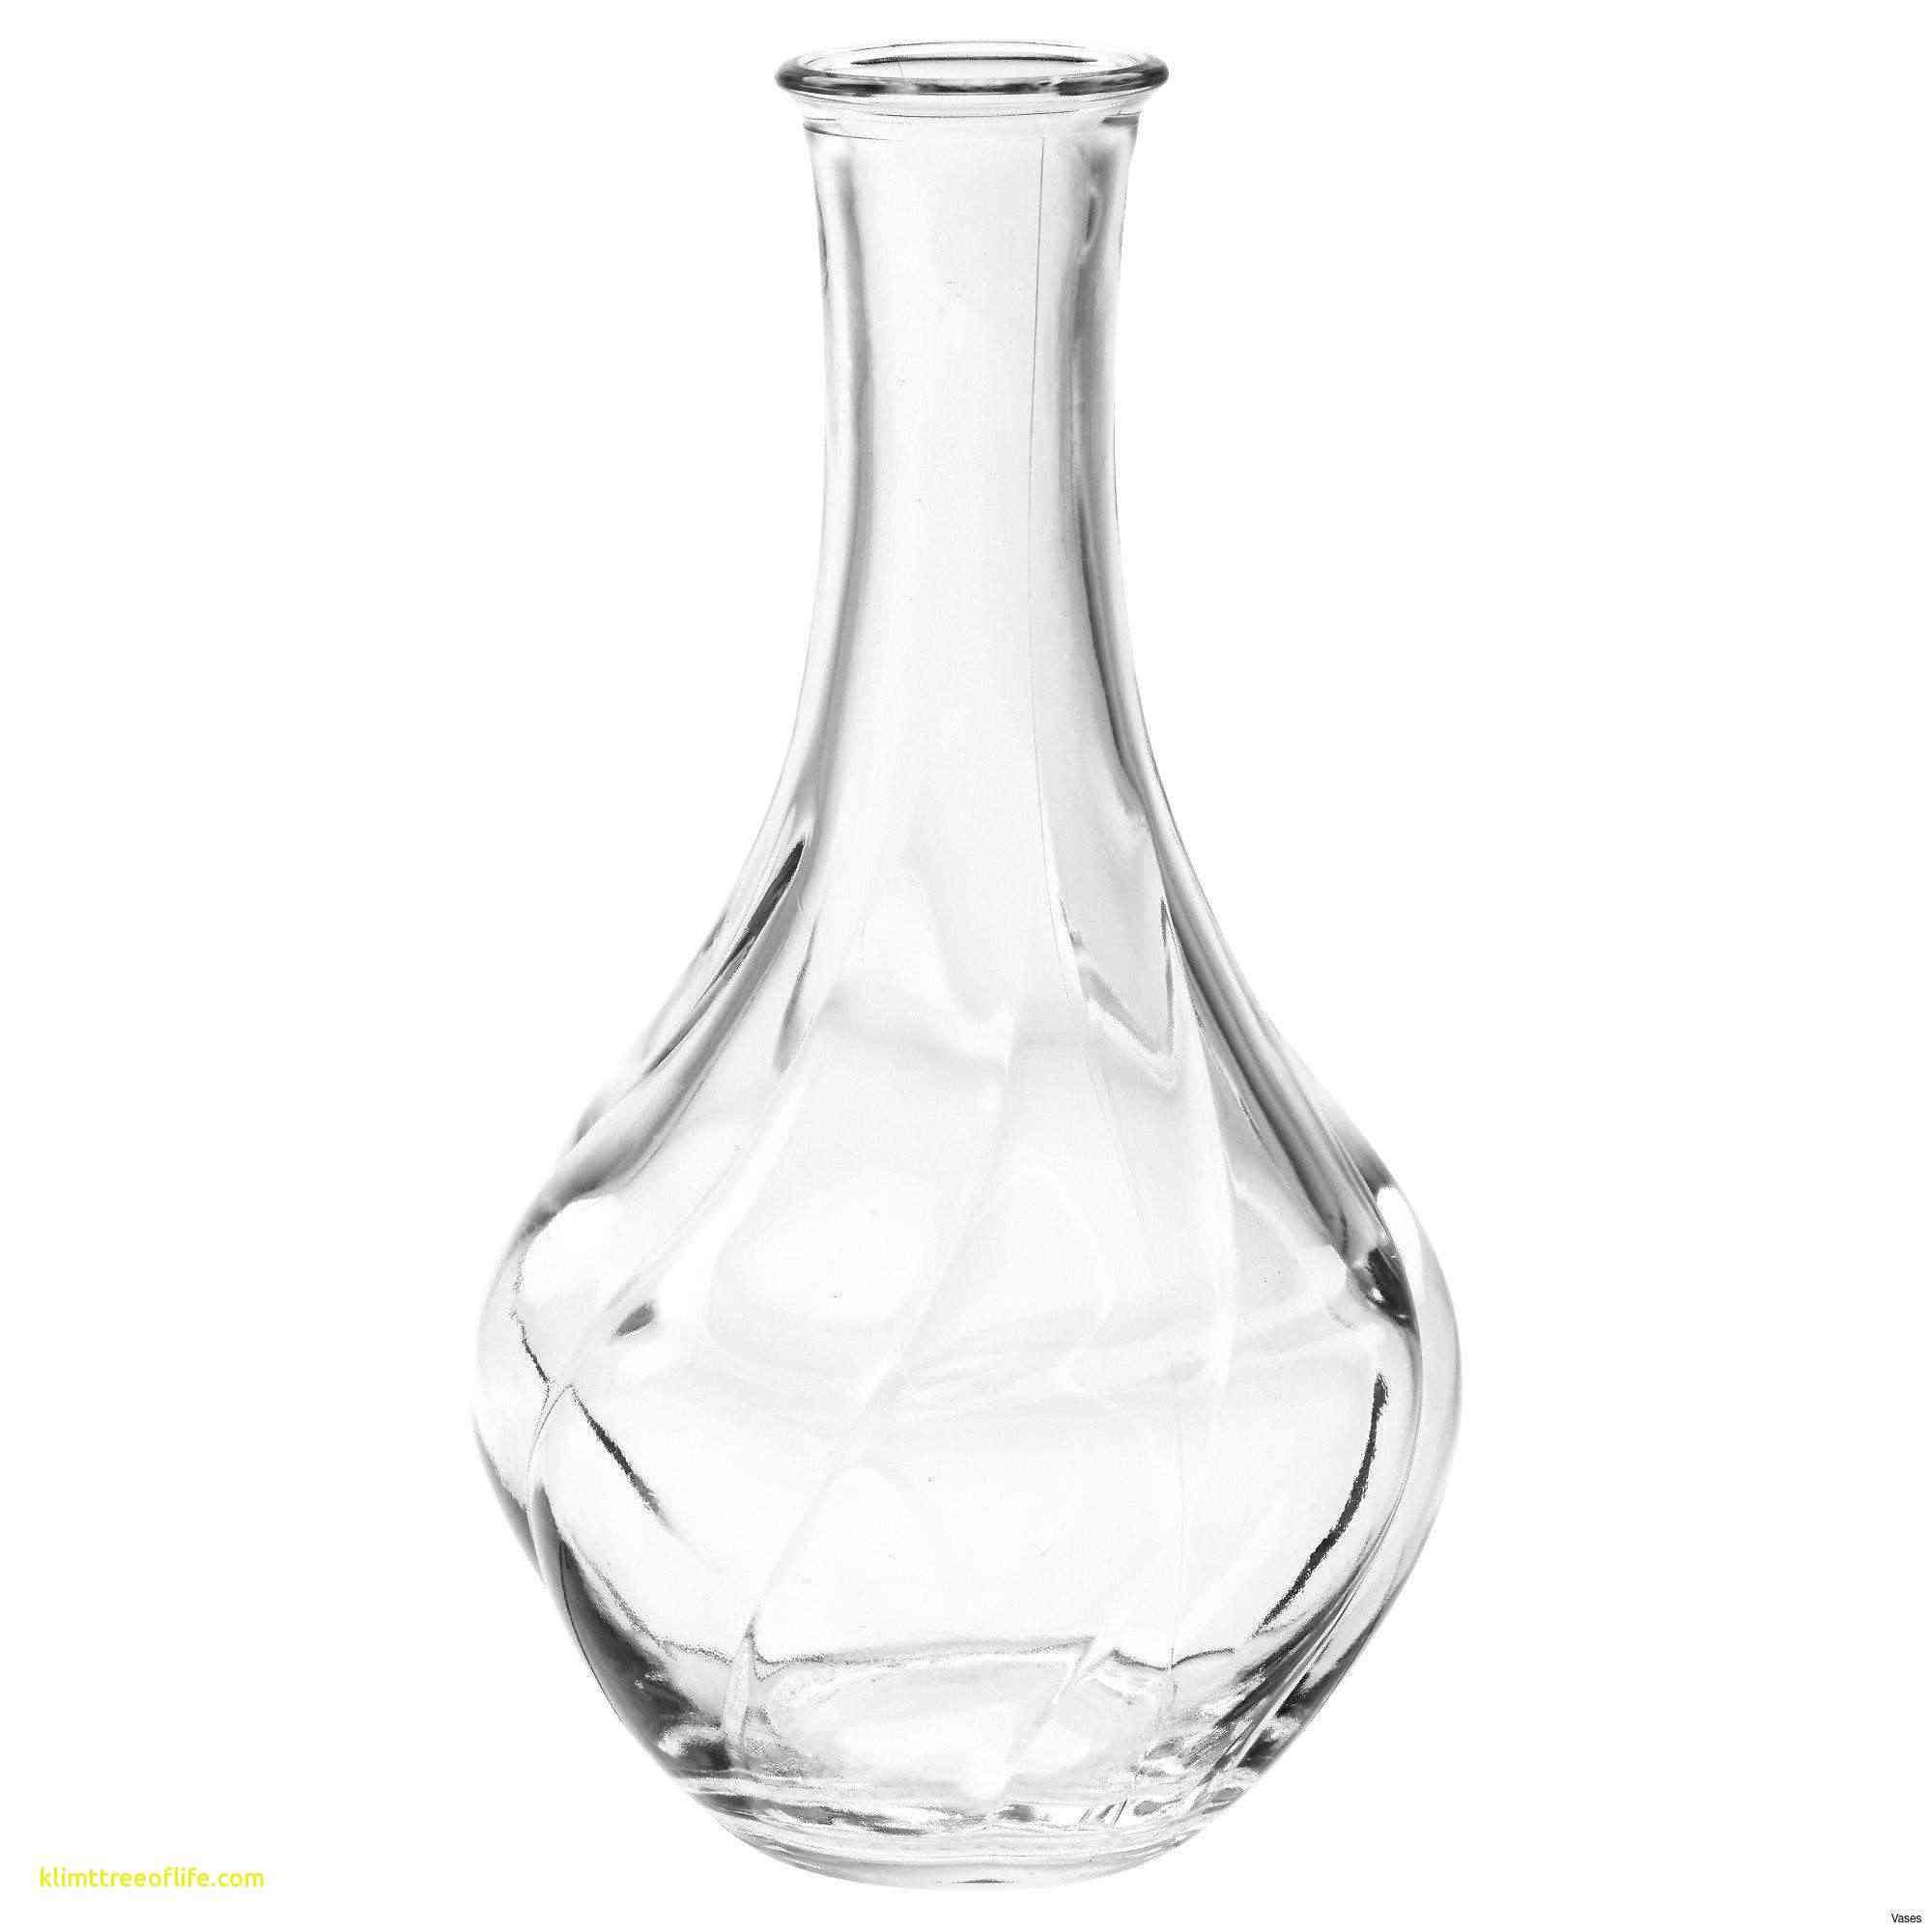 walmart glass vases of big glass vase pictures paint a picture luxury h vases paint vase i throughout big glass vase pictures paint a picture luxury h vases paint vase i 0d with glue and food